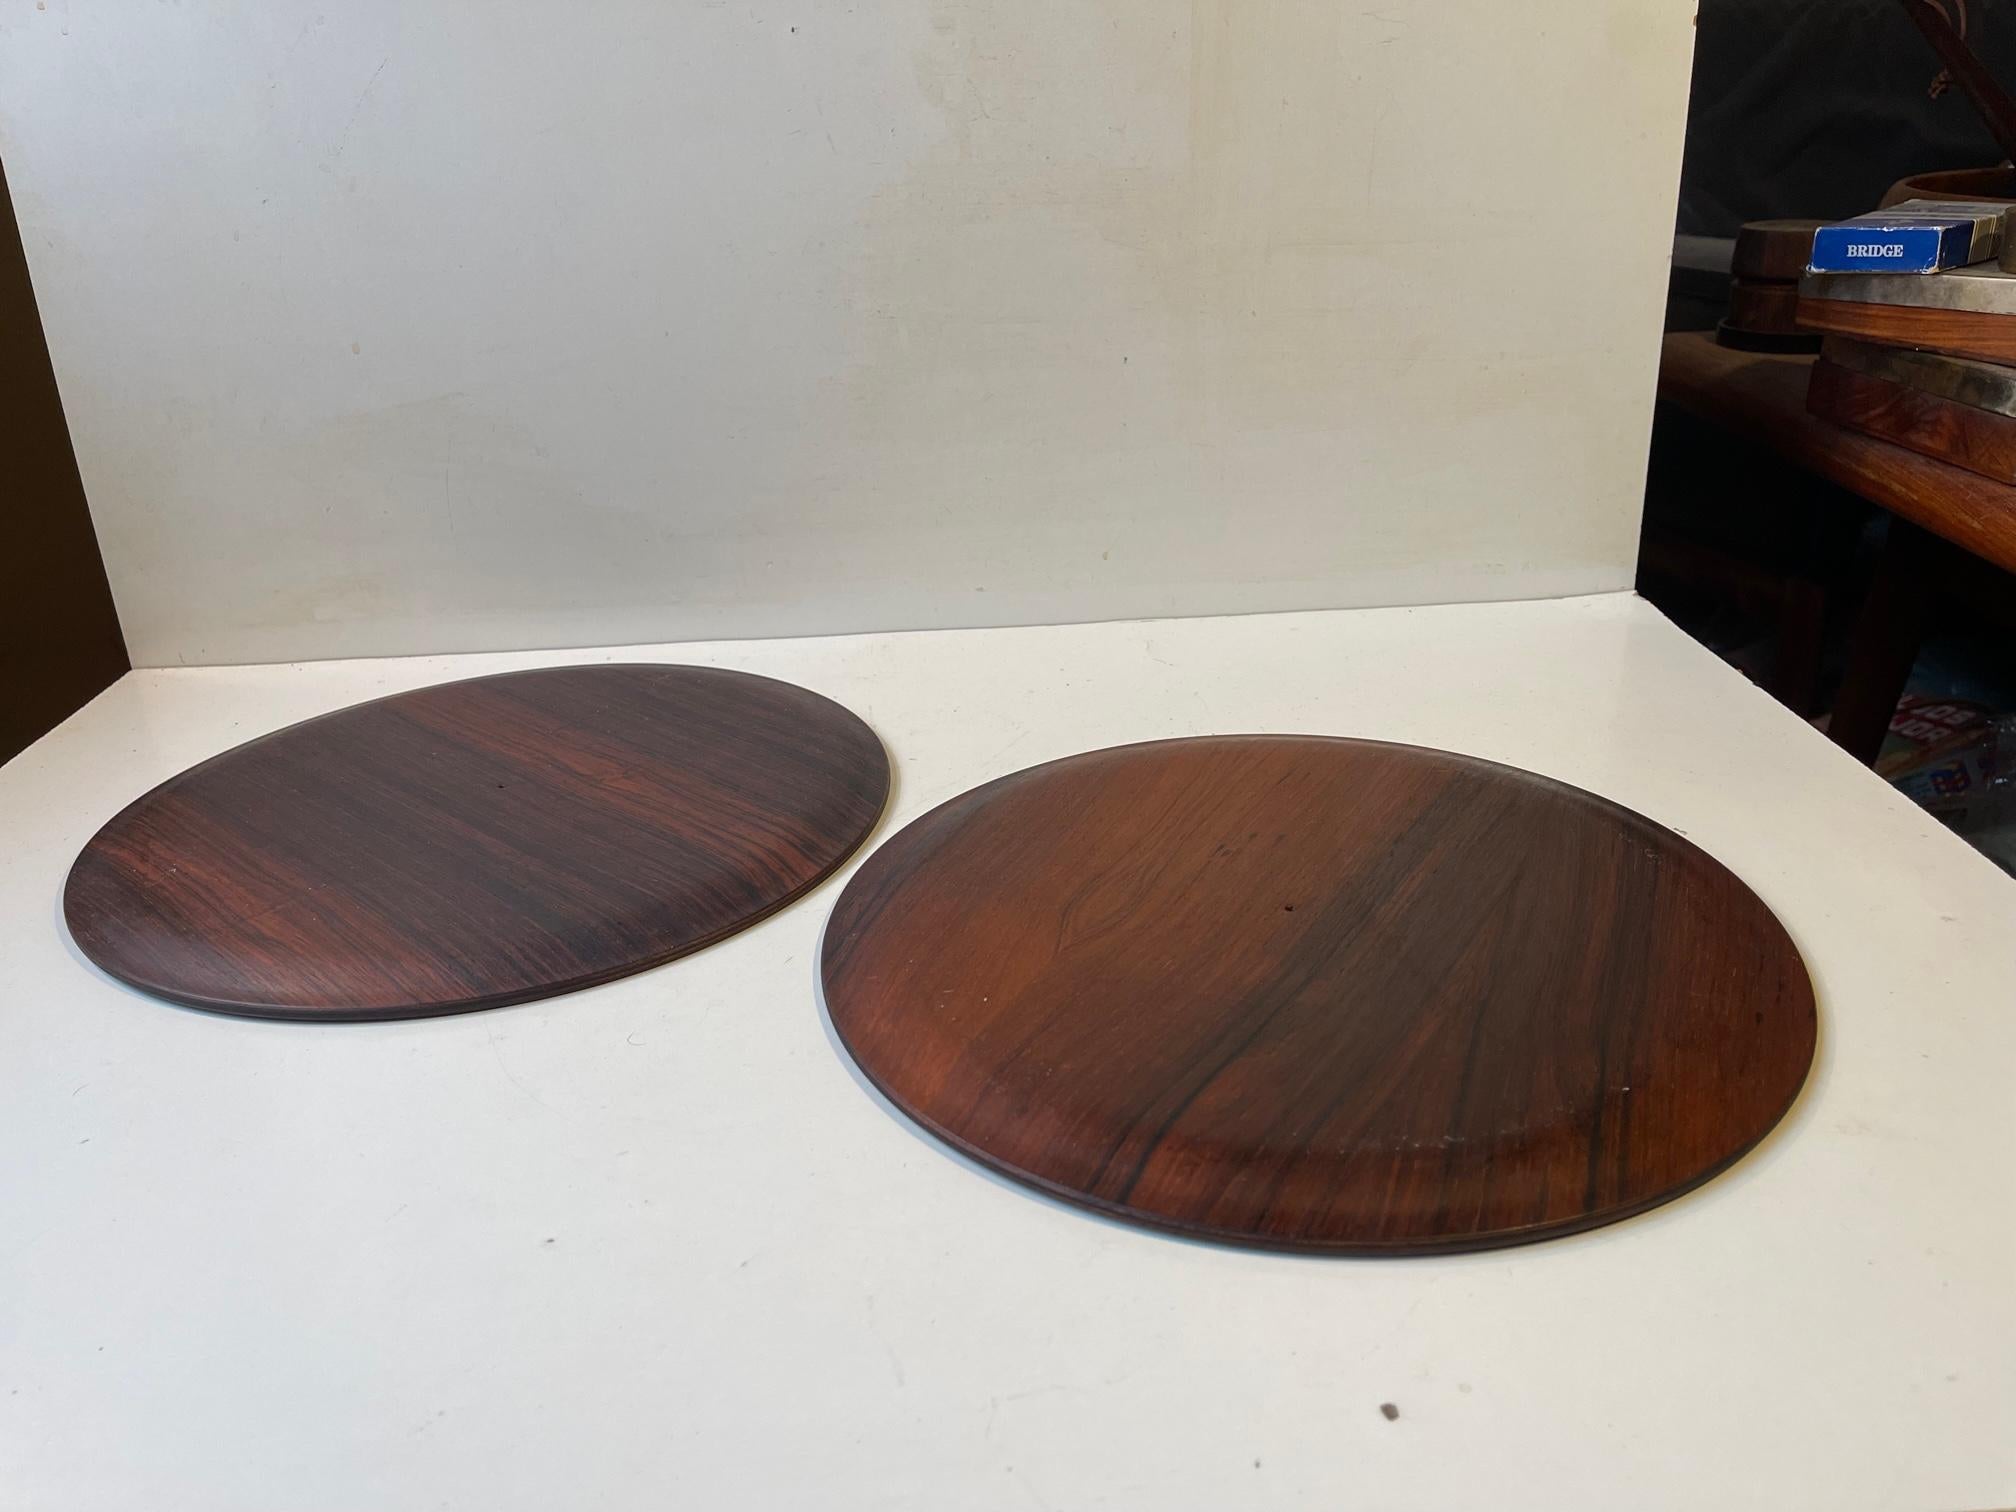 Round Scandinavian Modern Rosewood Drink Trays, 1960s For Sale 1